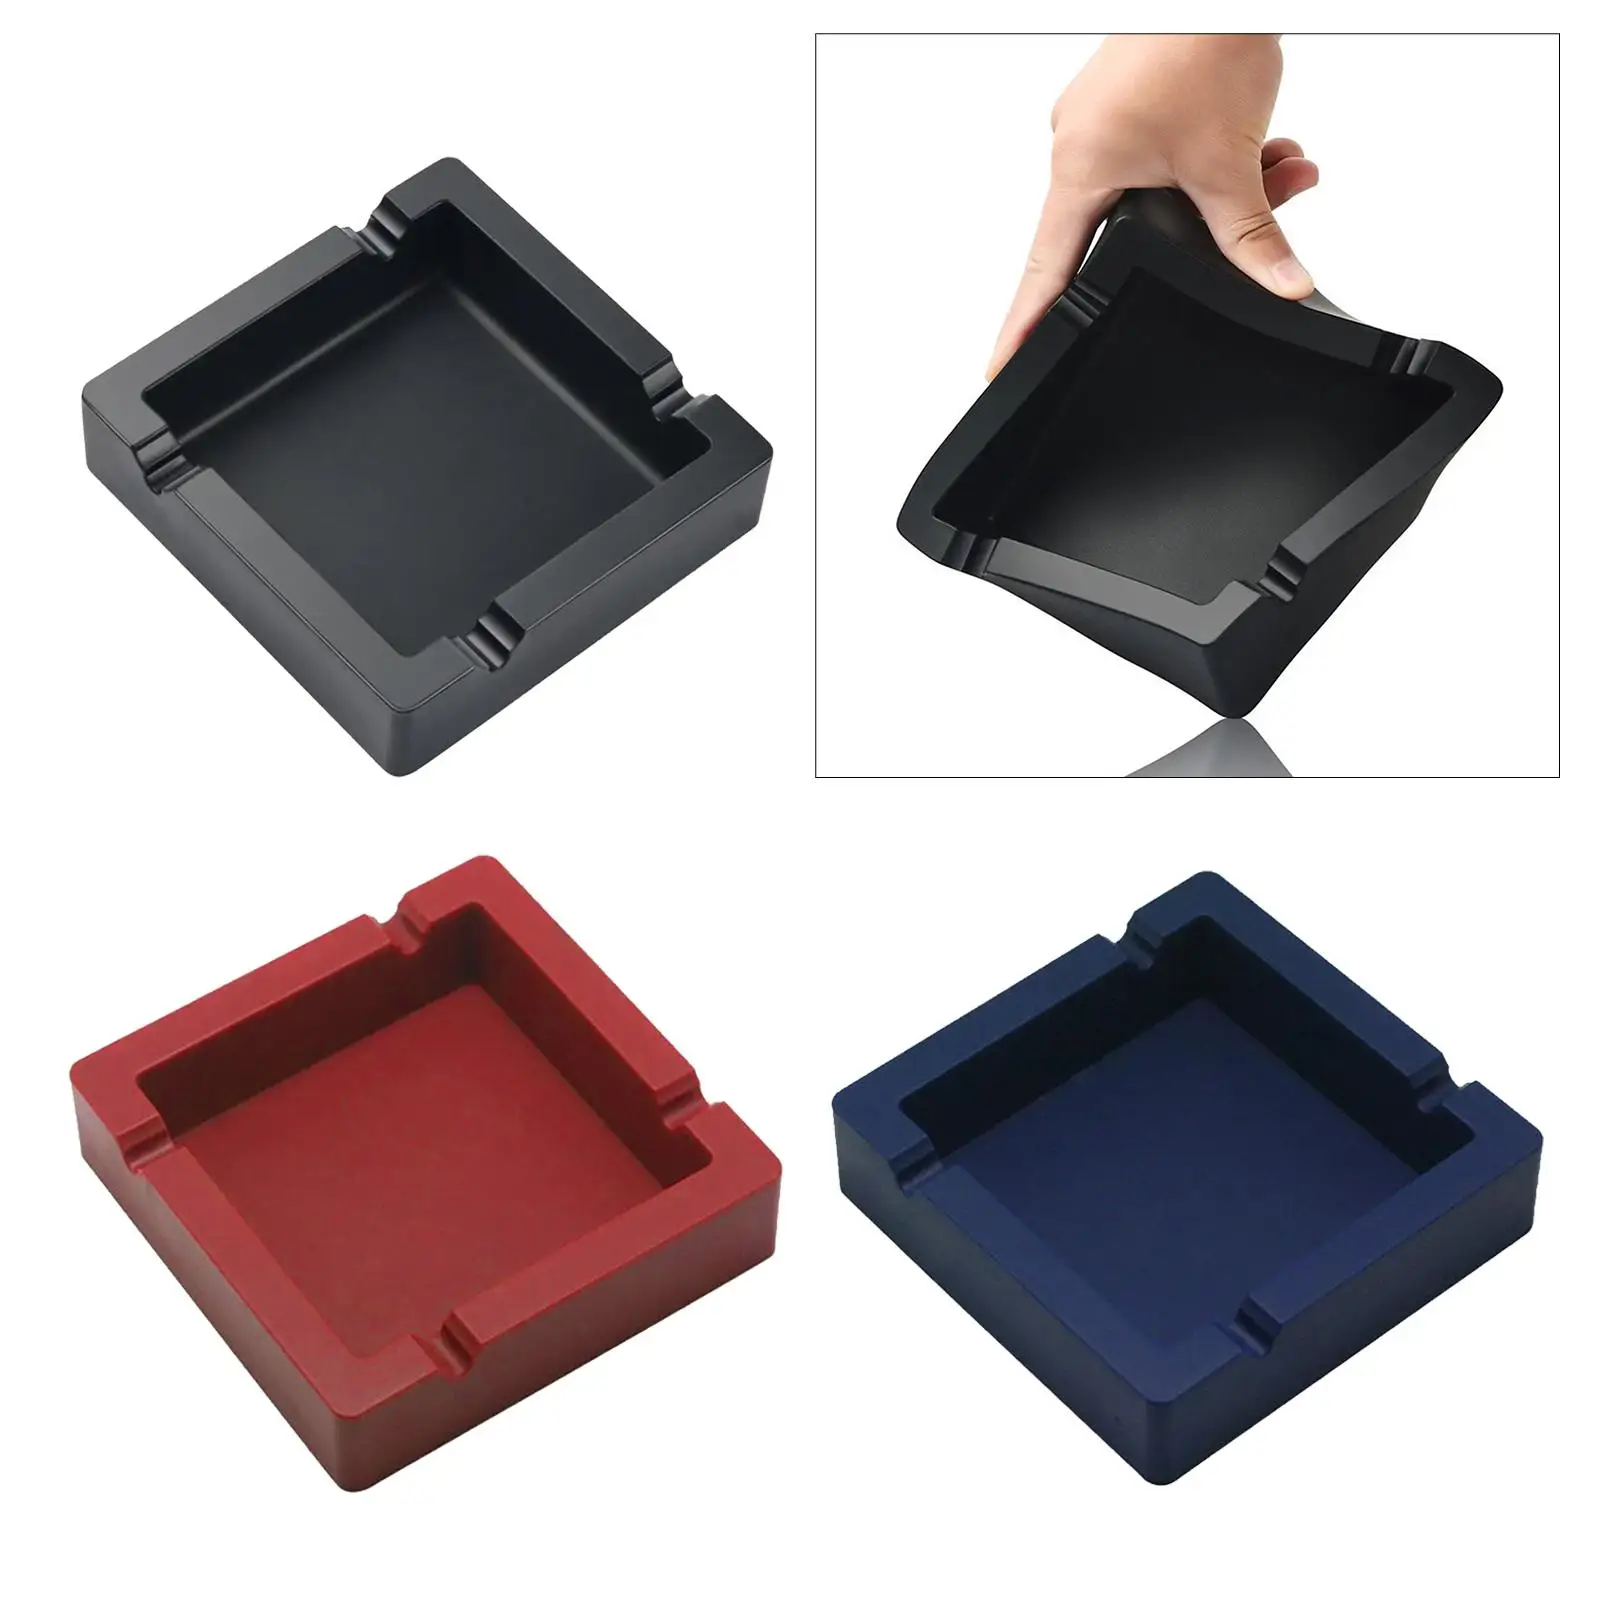 Portable Silicone Ashtray Cigar Cigarette Rest Soft 4 Dual-Use Grooves Heat Resistant Cigar Ashtray for Desktop Patio Decoration